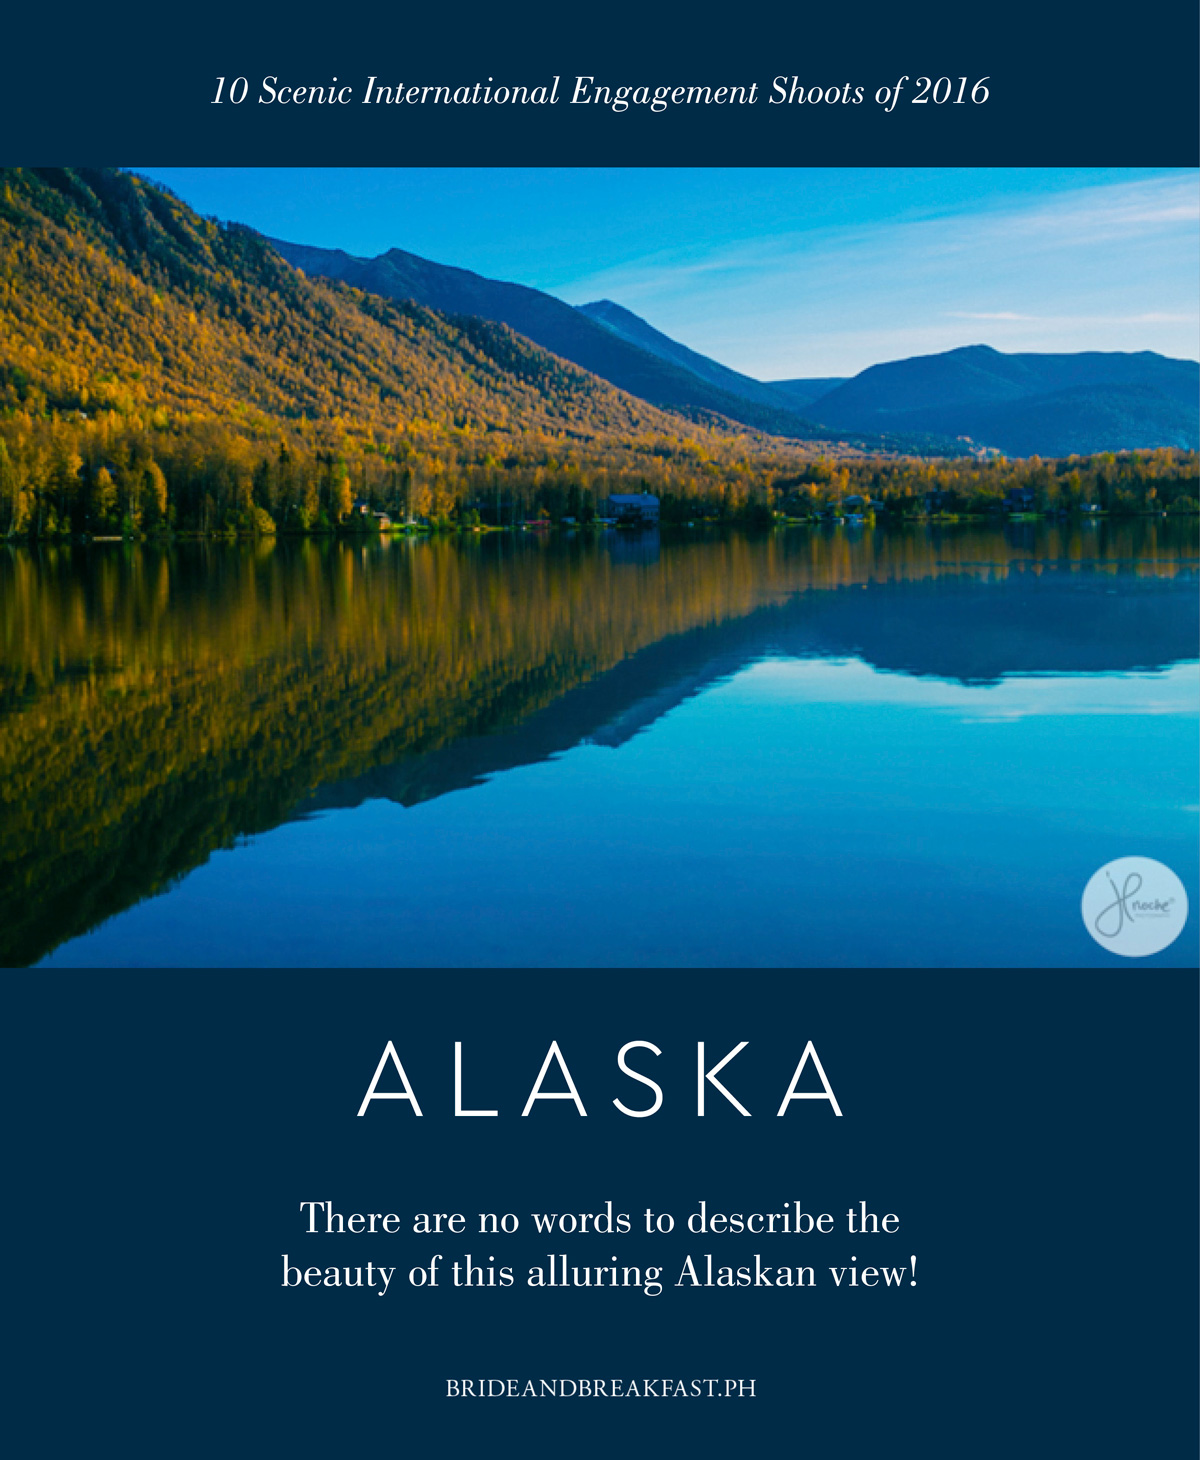 1. Alaska There are no words to describe the beauty of this alluring Alaskan view!